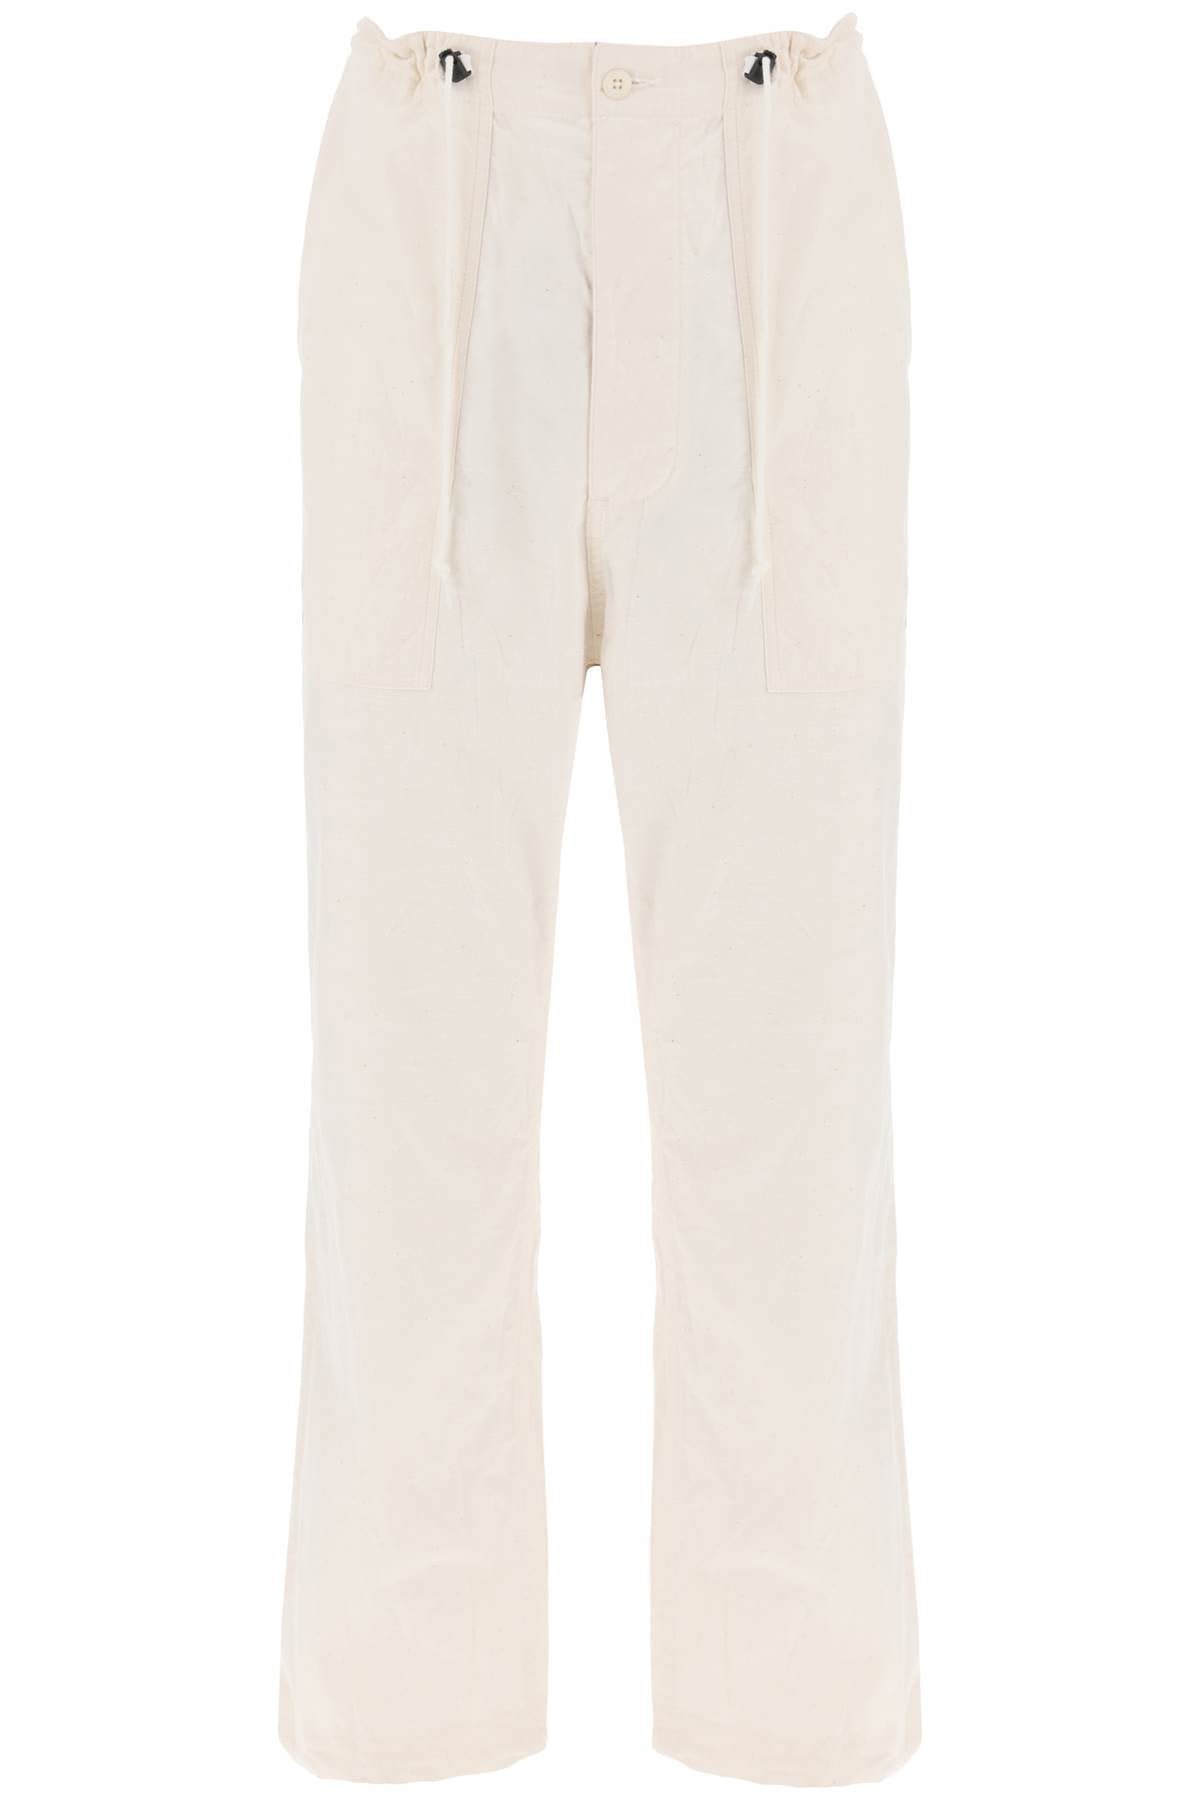 NEEDLES FATIGUE PANTS WITH WIDE LEG